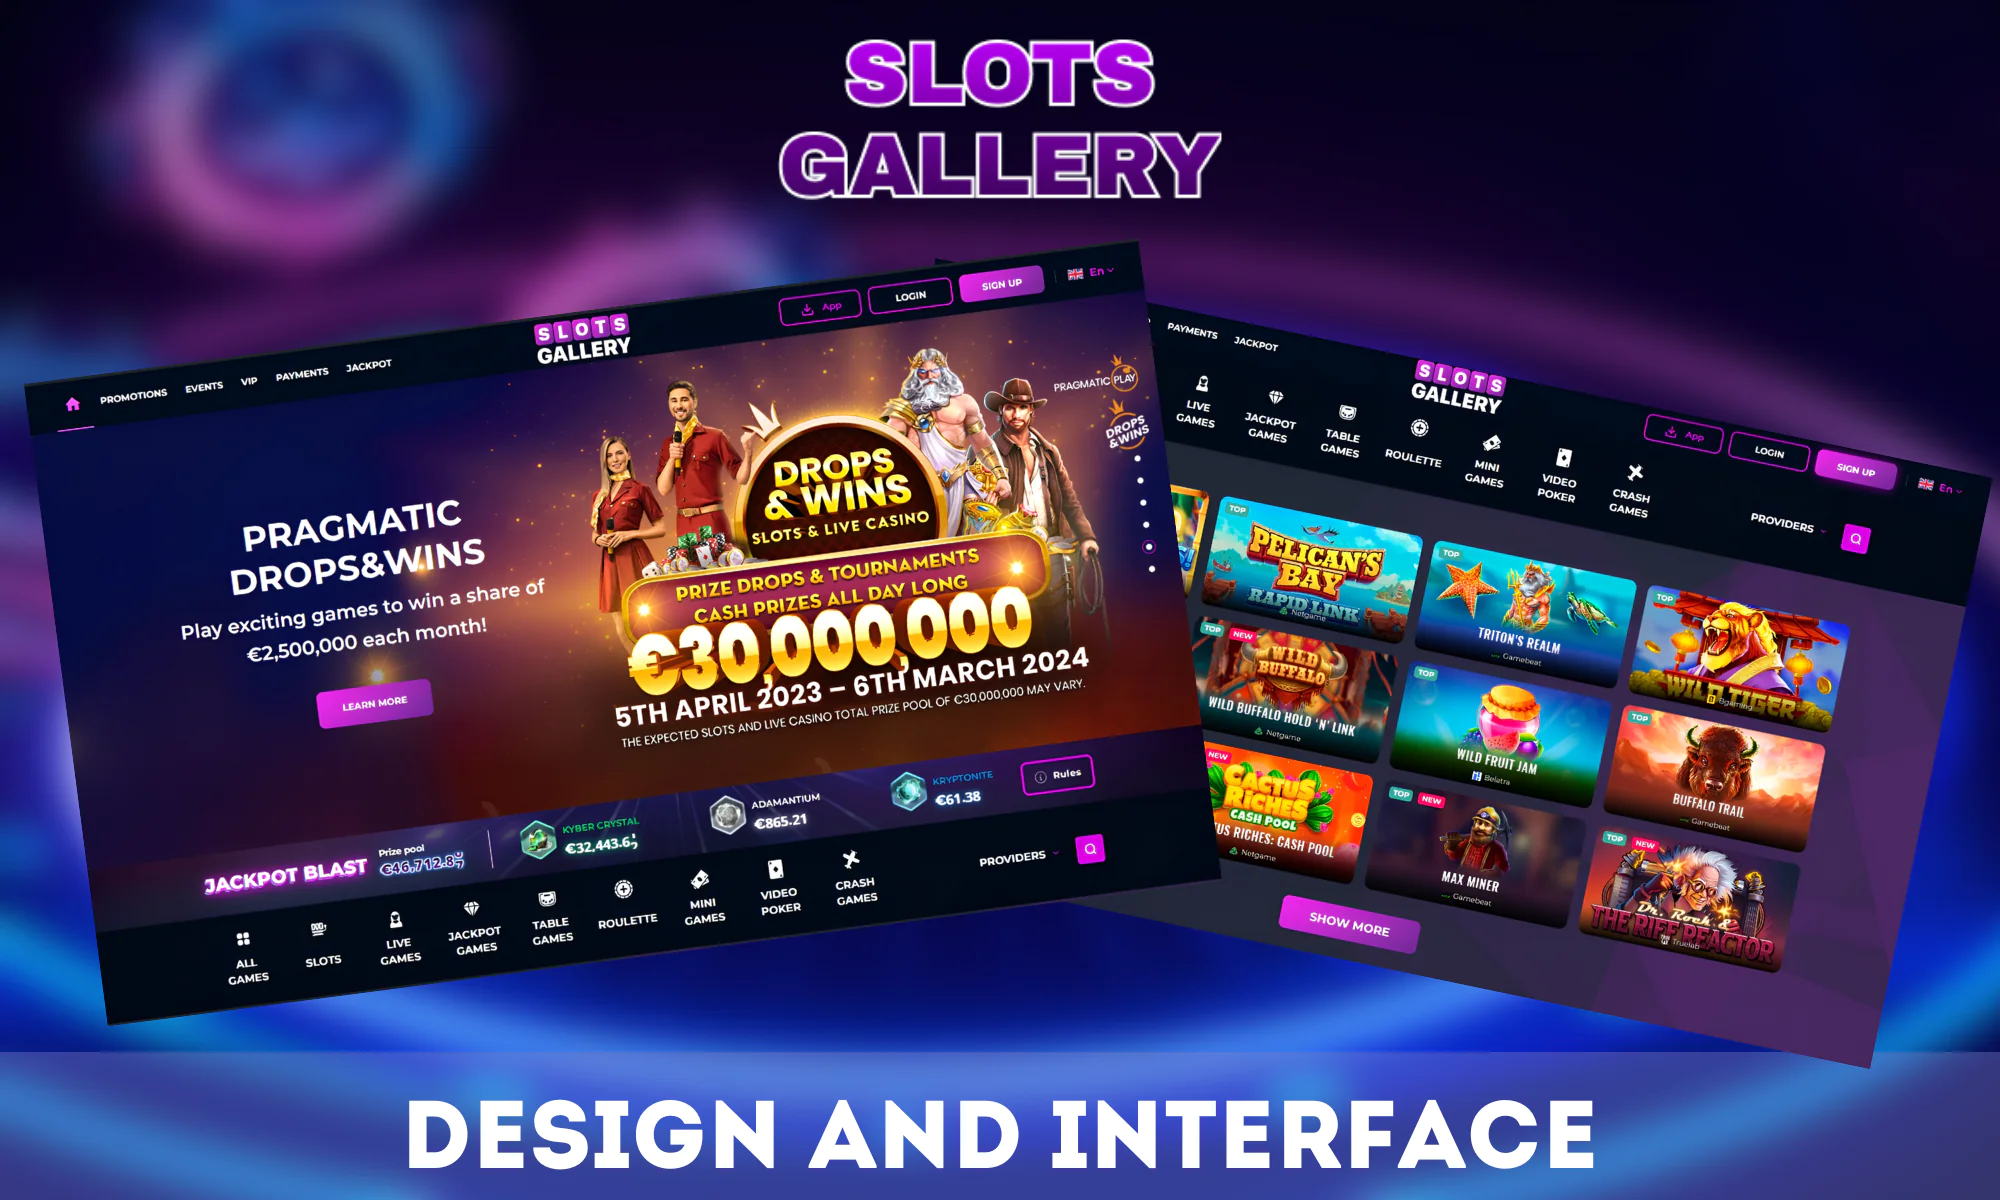 Slots Gallery has a user-friendly interface in a modern style